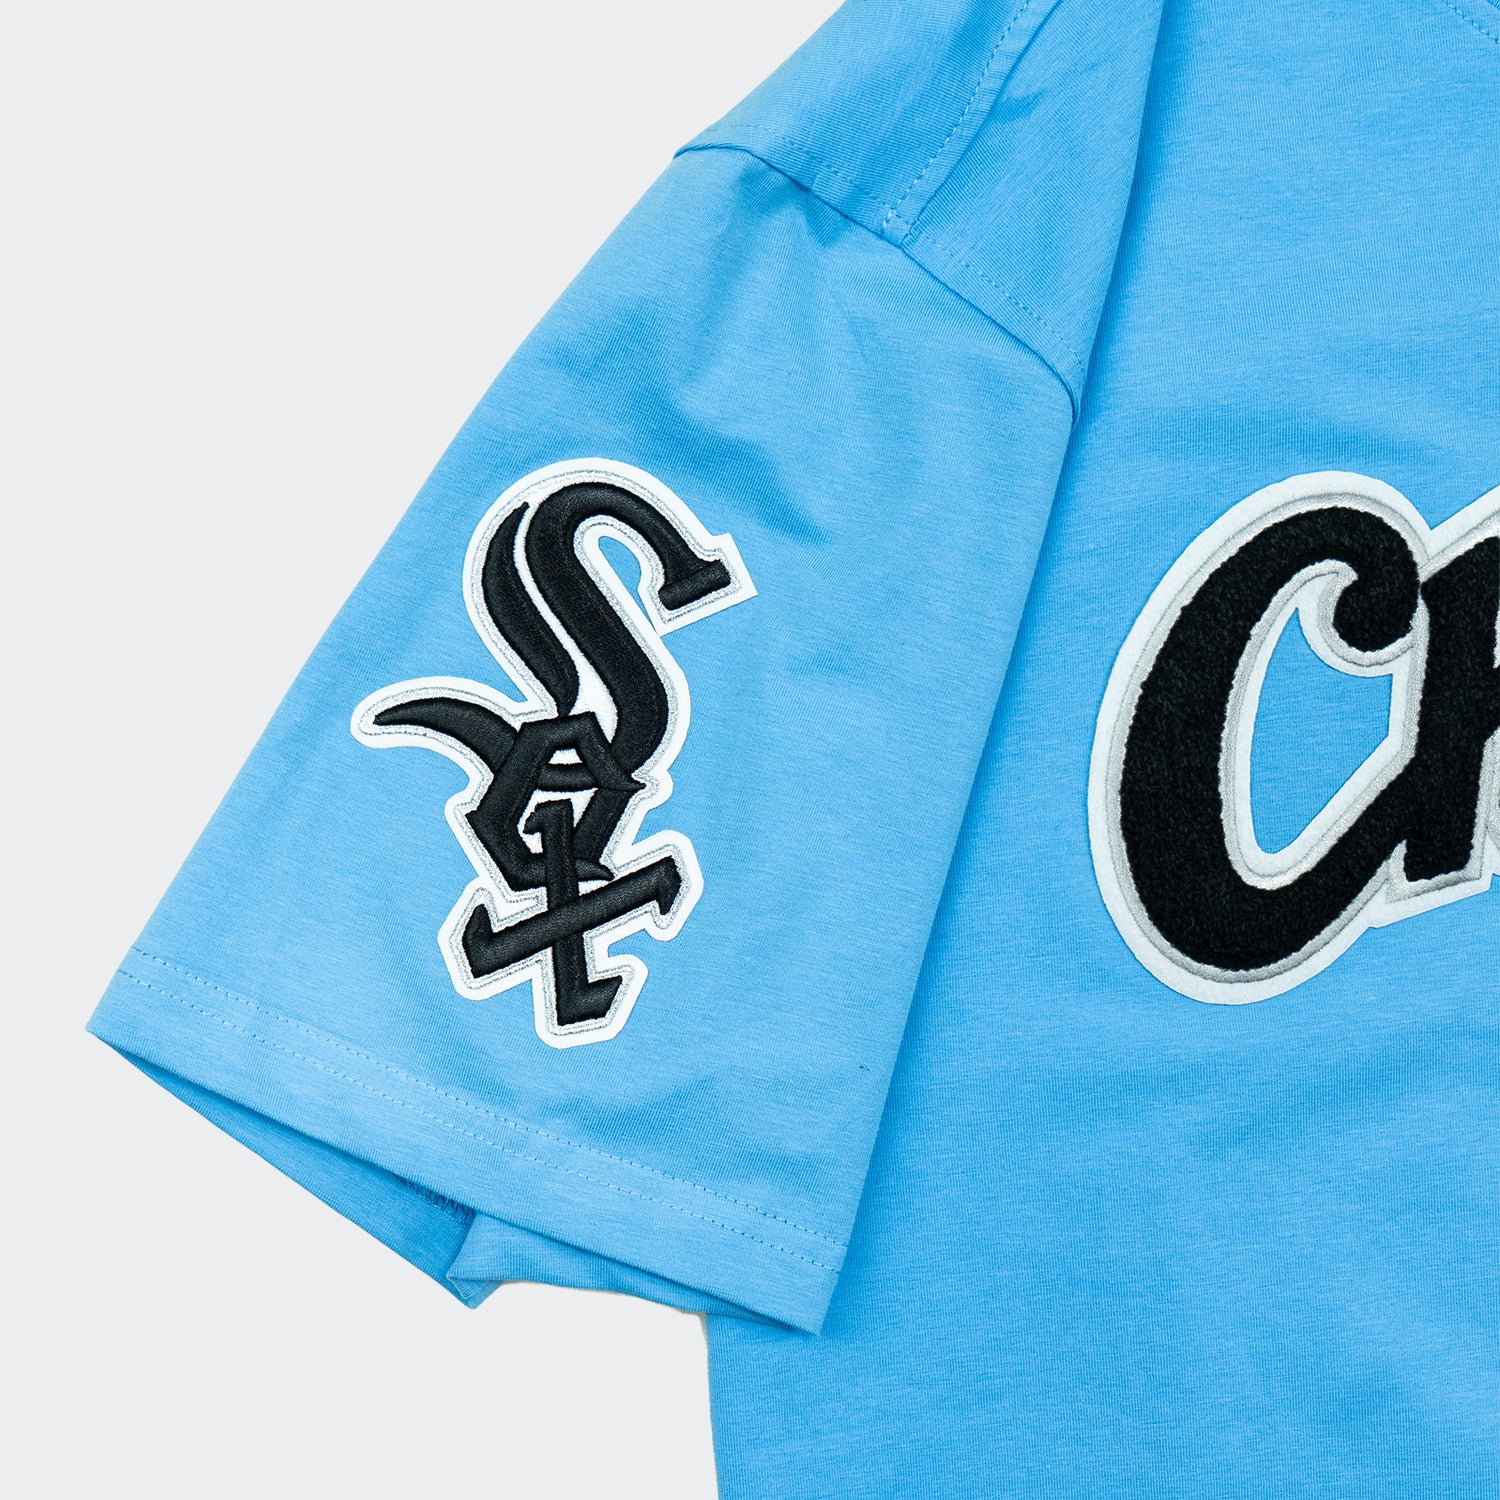 Chicago White Sox Gear, White Sox Jerseys, Store, Chicago Pro Shop, Apparel